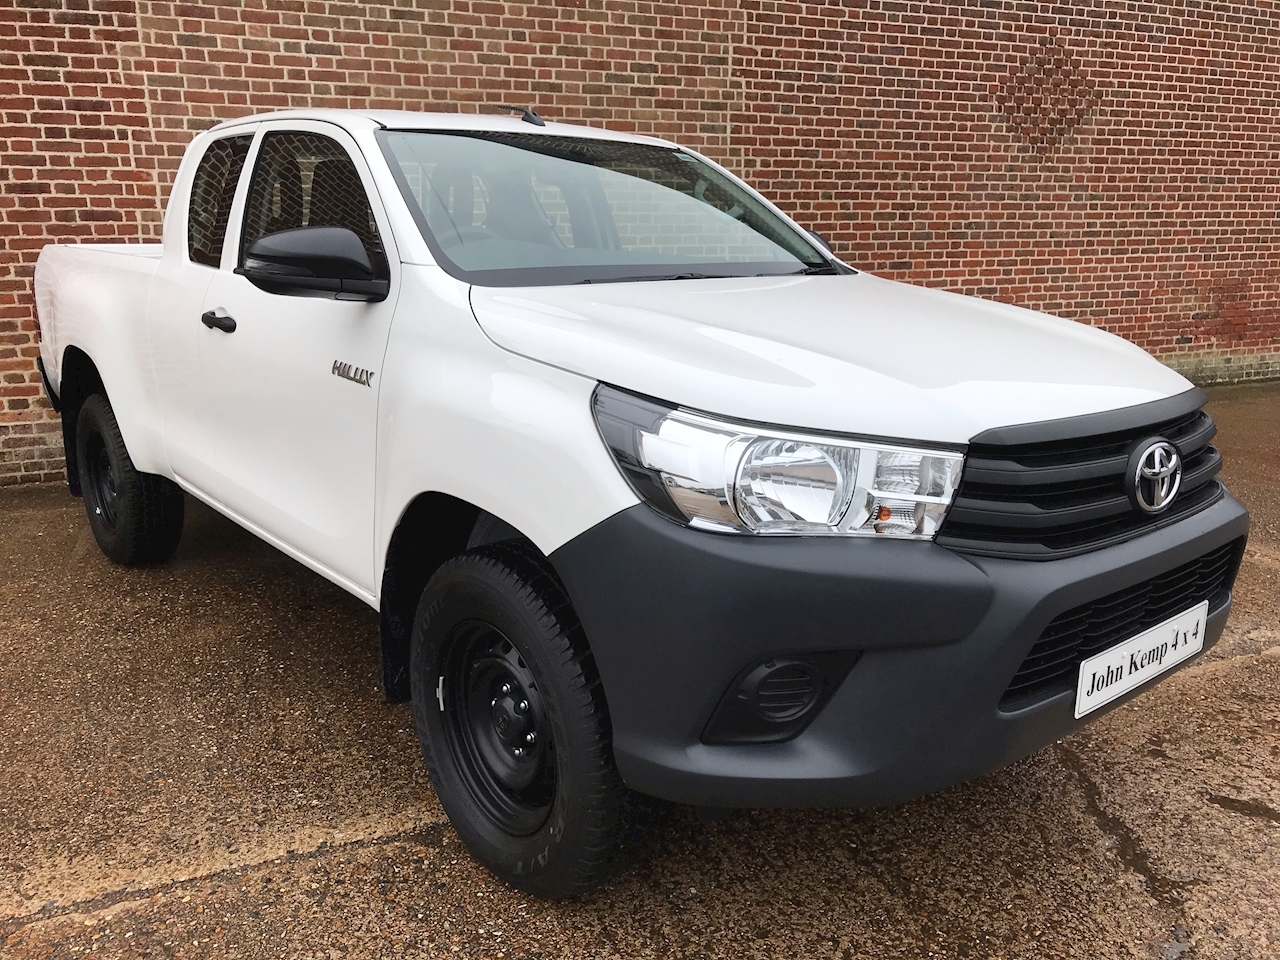 Hilux Active 2.4 4dr Extra Cab Pickup Manual Diesel